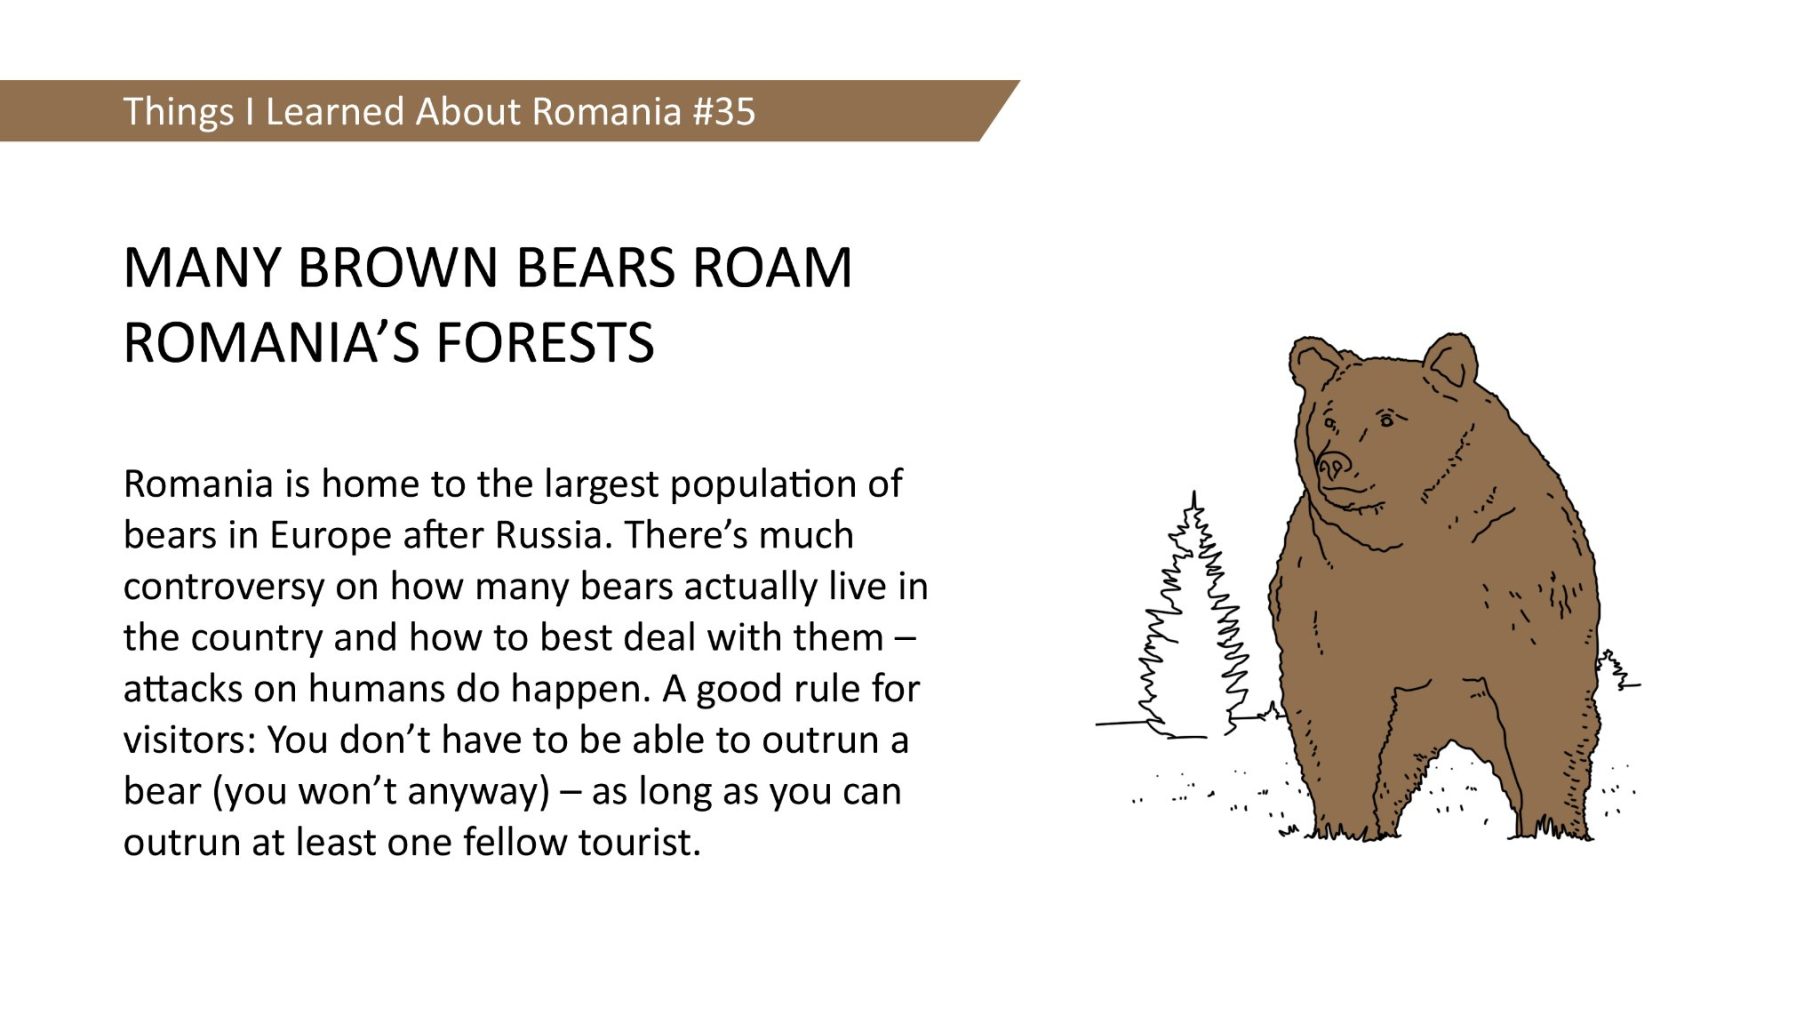 MANY BROWN BEARS ROAM ROMANIA'S FORESTS - Romania is home to the largest population of bears in Europe after Russia. There's much controversy on how many bears actually live in the country and how to best deal with them attacks on humans do happen. A good rule for visitors: You don't have to be able to outrun a bear (you won't anyway) - as long as you can outrun at least one fellow tourist.